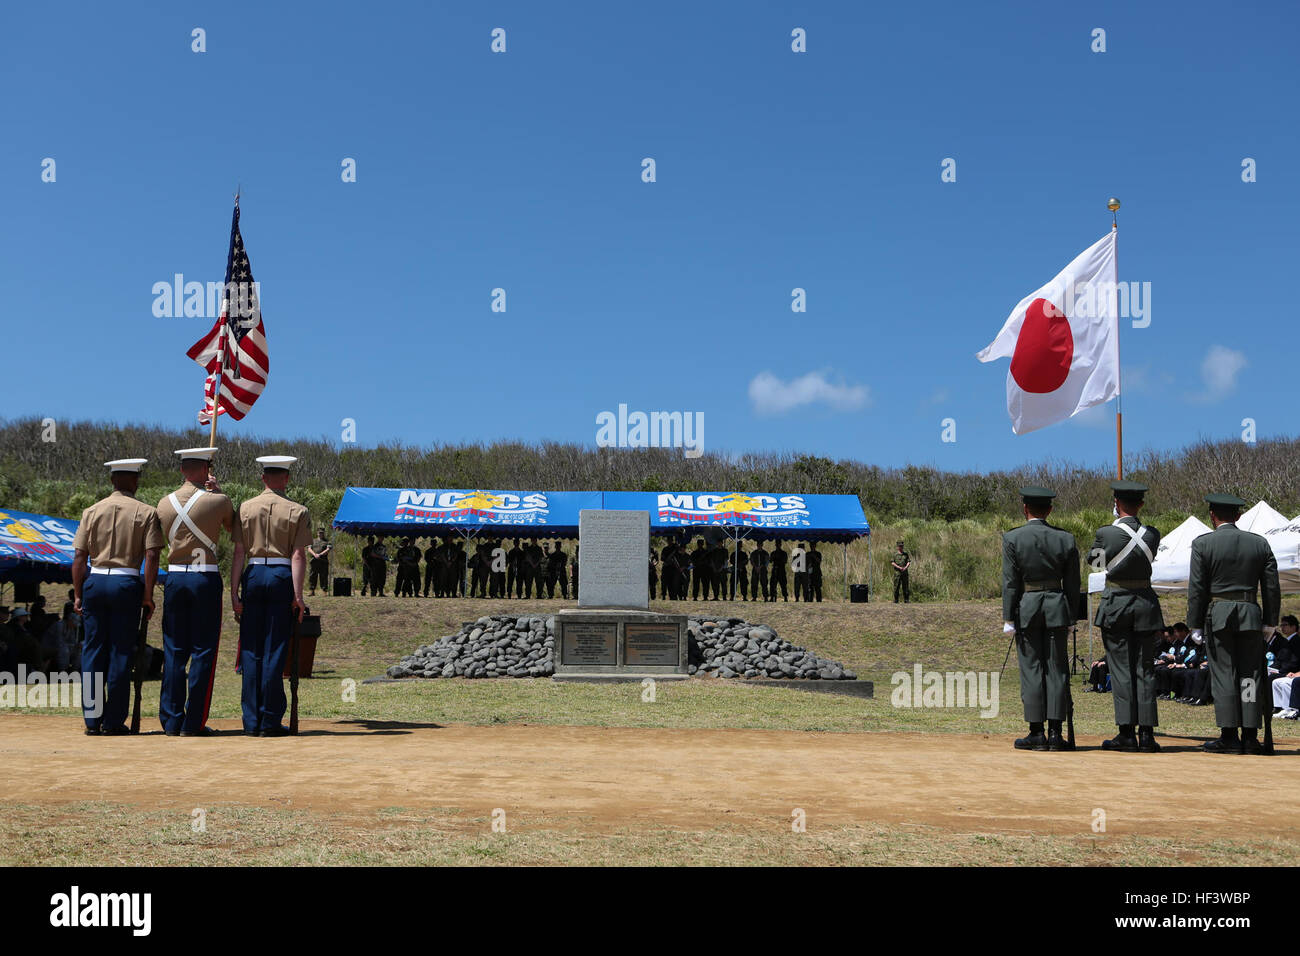 A U.S. Marine Corps and Japanese soldier color guard stands at attention at the commencement of the 71st Commemoration of the Battle of Iwo Jima at Iwo To, Japan, March 19, 2015. The Iwo Jima Reunion of Honor is an opportunity for Japanese and U.S. veterans and their families, dignitaries, leaders and service members from both nations to honor the battle while recognizing 71 years of peace and prosperity in the U.S. – Japanese alliance. (U.S. Marine Corps photo by MCIPAC Combat Camera Lance Cpl. Juan Esqueda / Released) Iwo Jima 71st Reunion of Honor 160319-M-JD520-158 Stock Photo